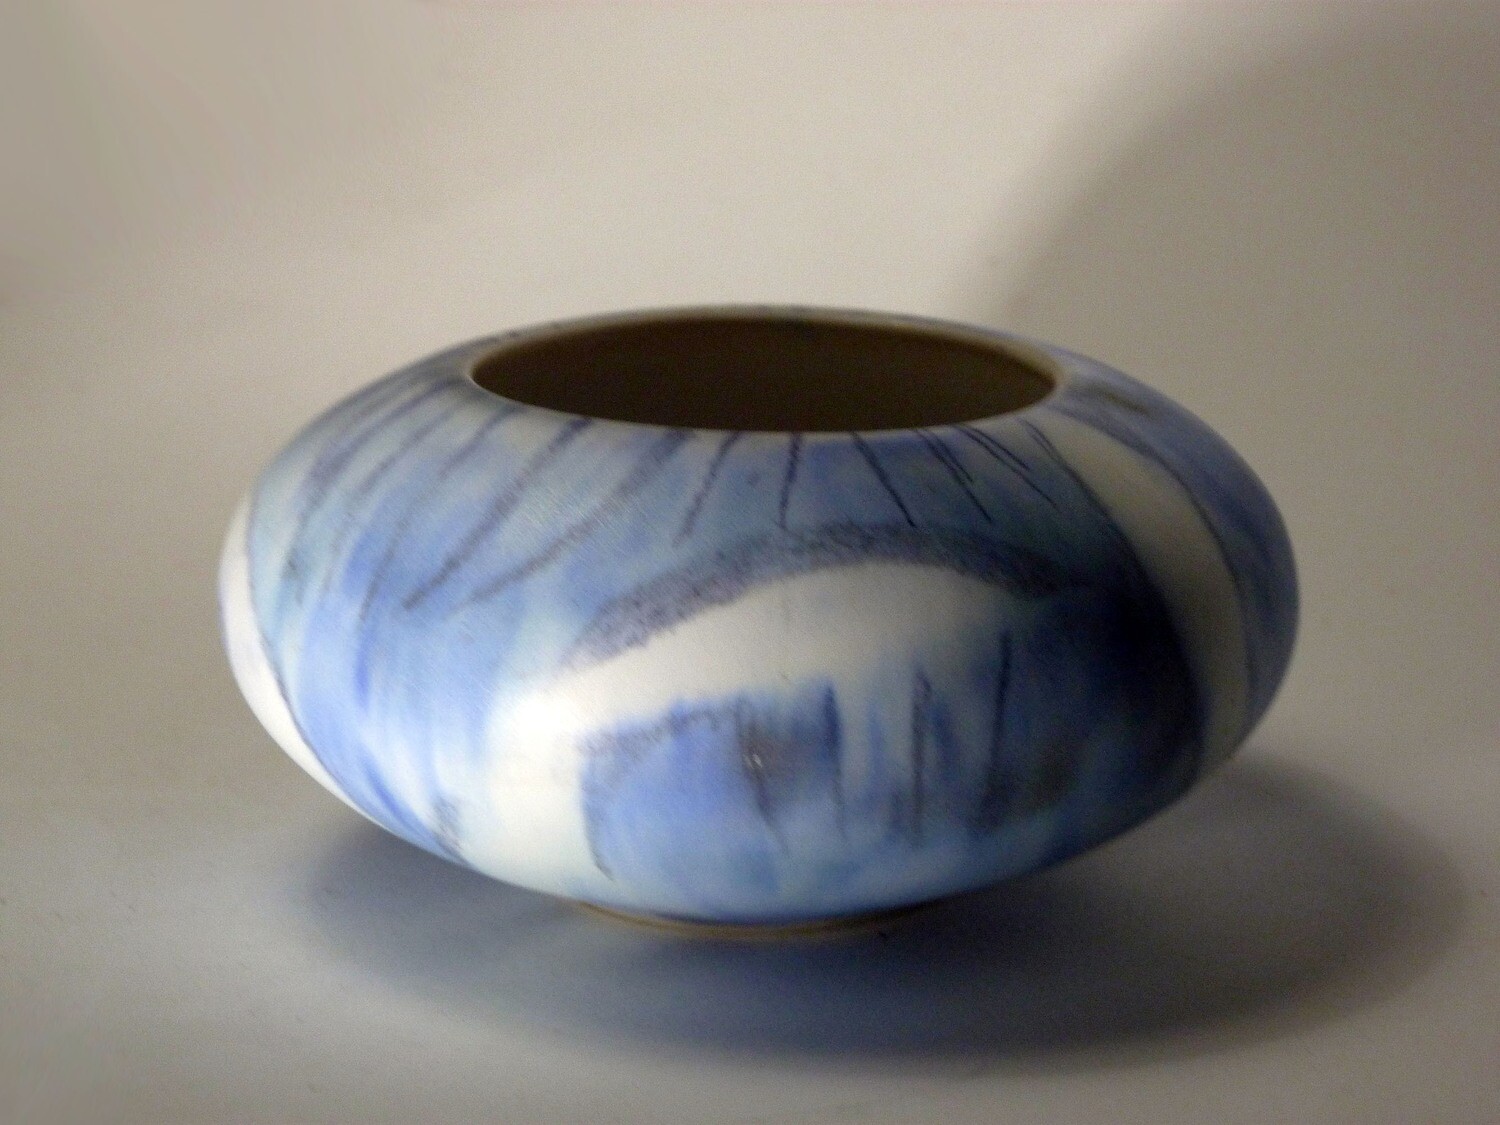 Round Bowl, One of a Kind by Gerda 5" dia